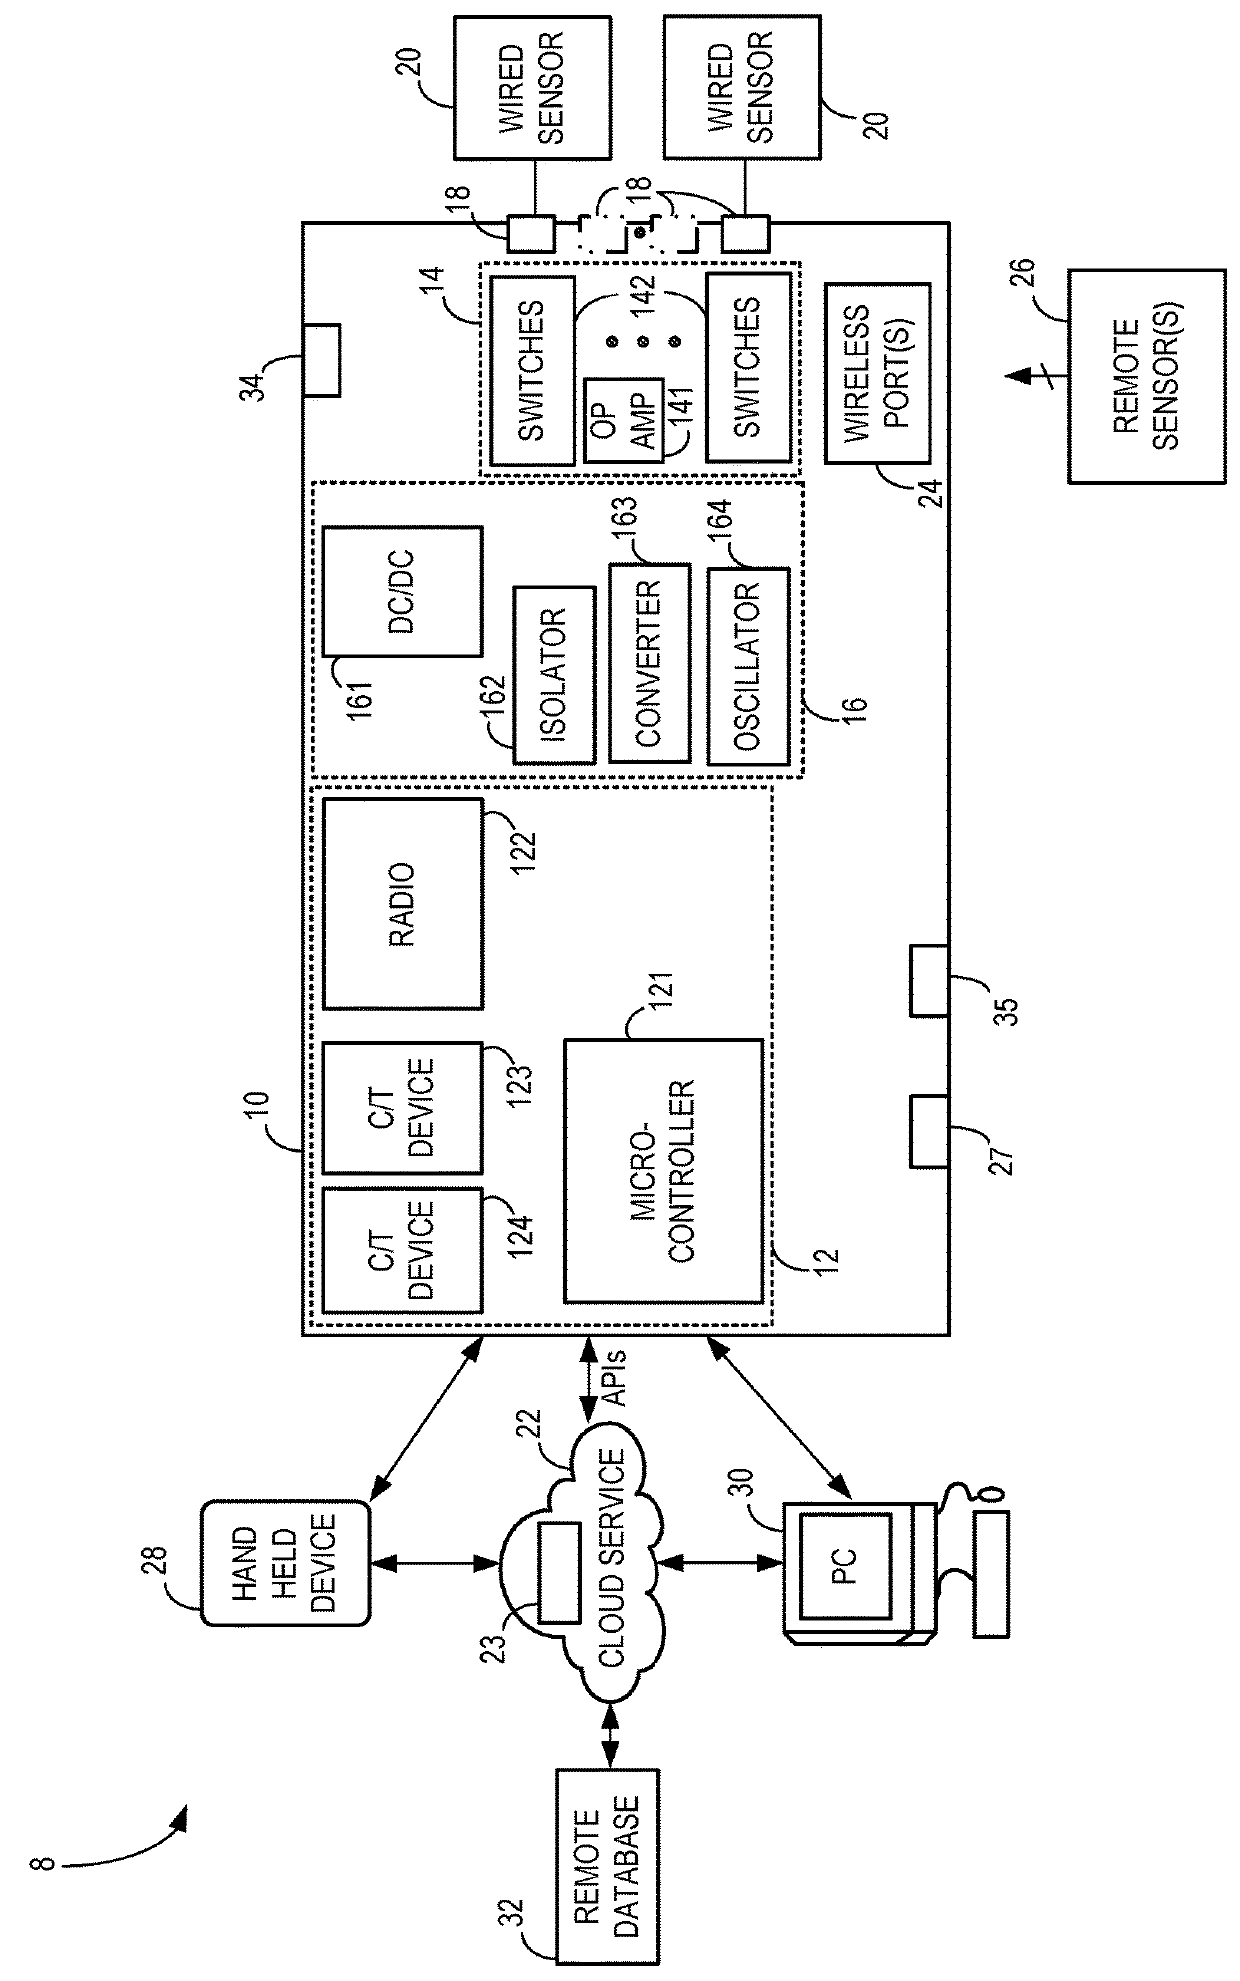 Water quality monitoring system and method